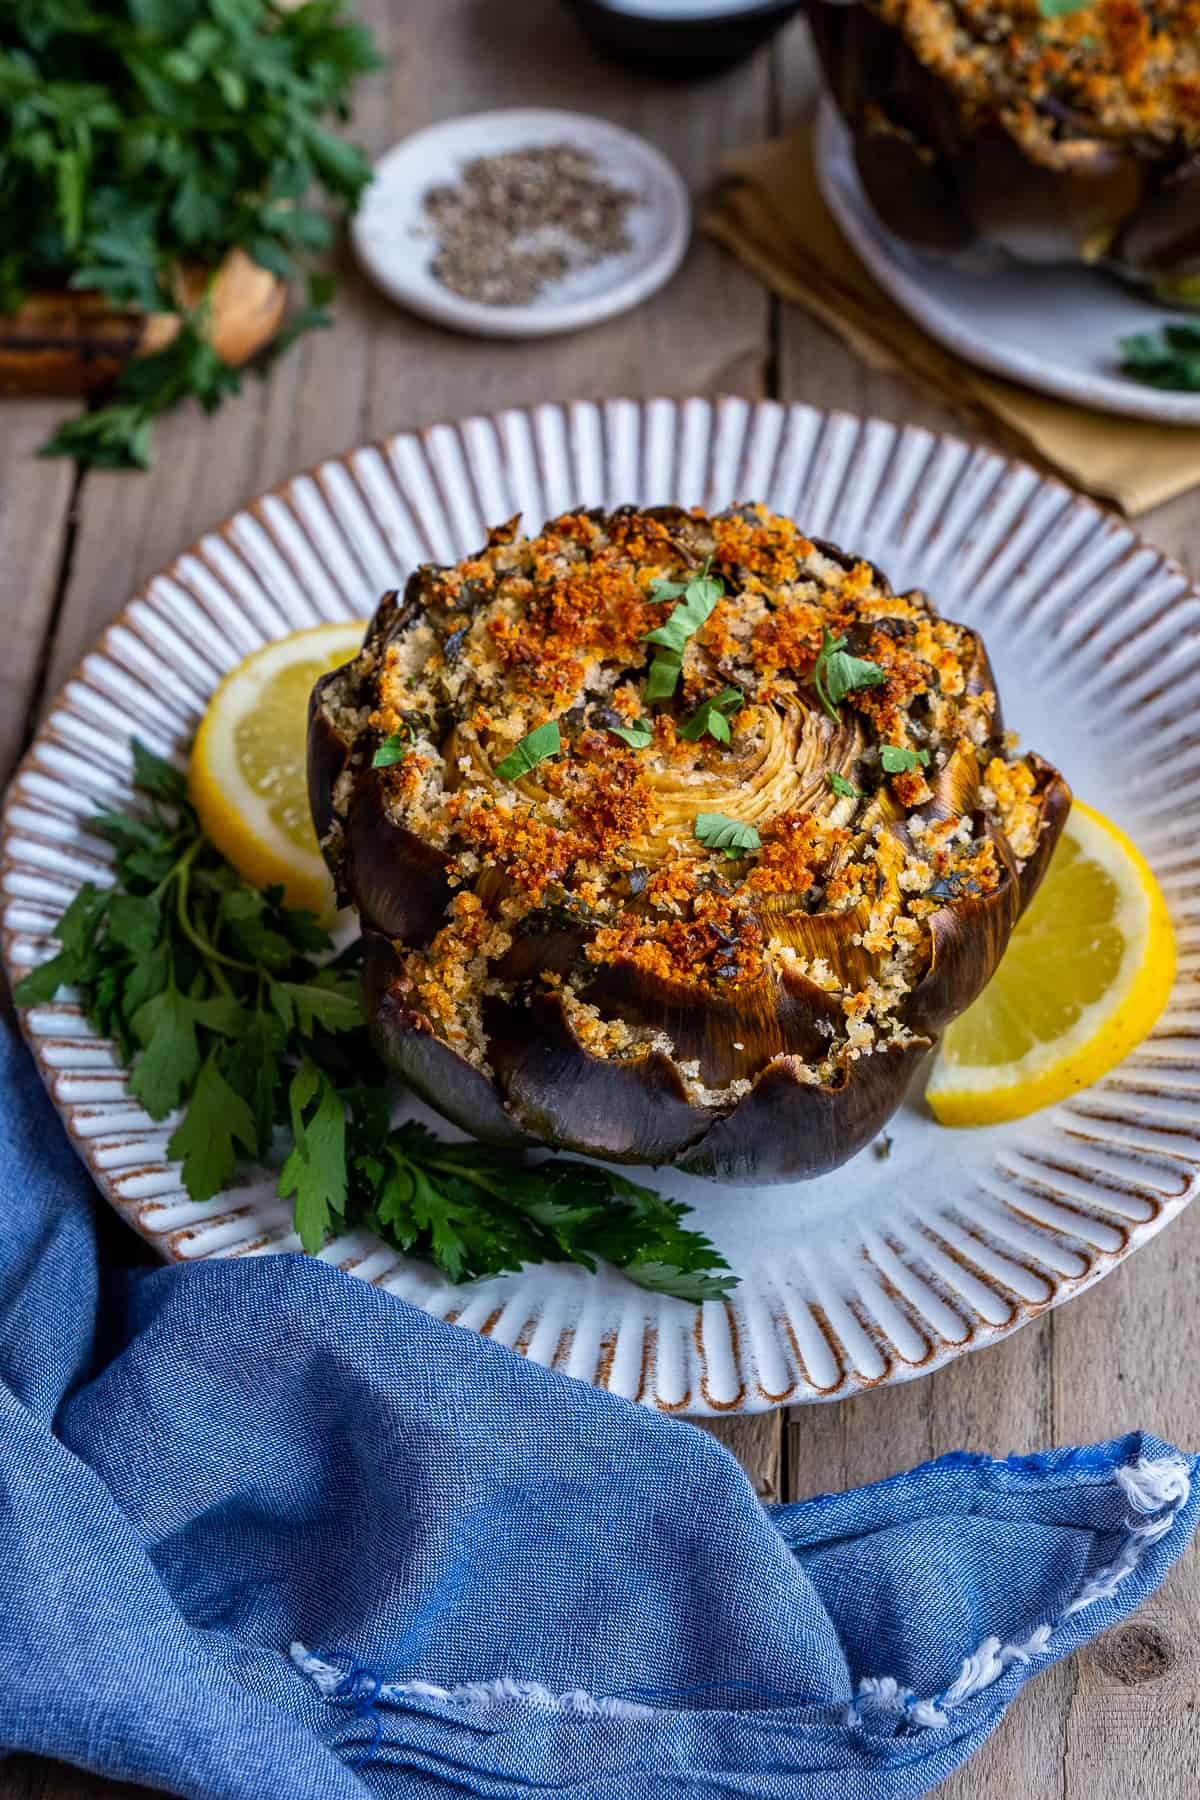 Stuffed artichoke on a white plate garnished with parsley and lemon slices.